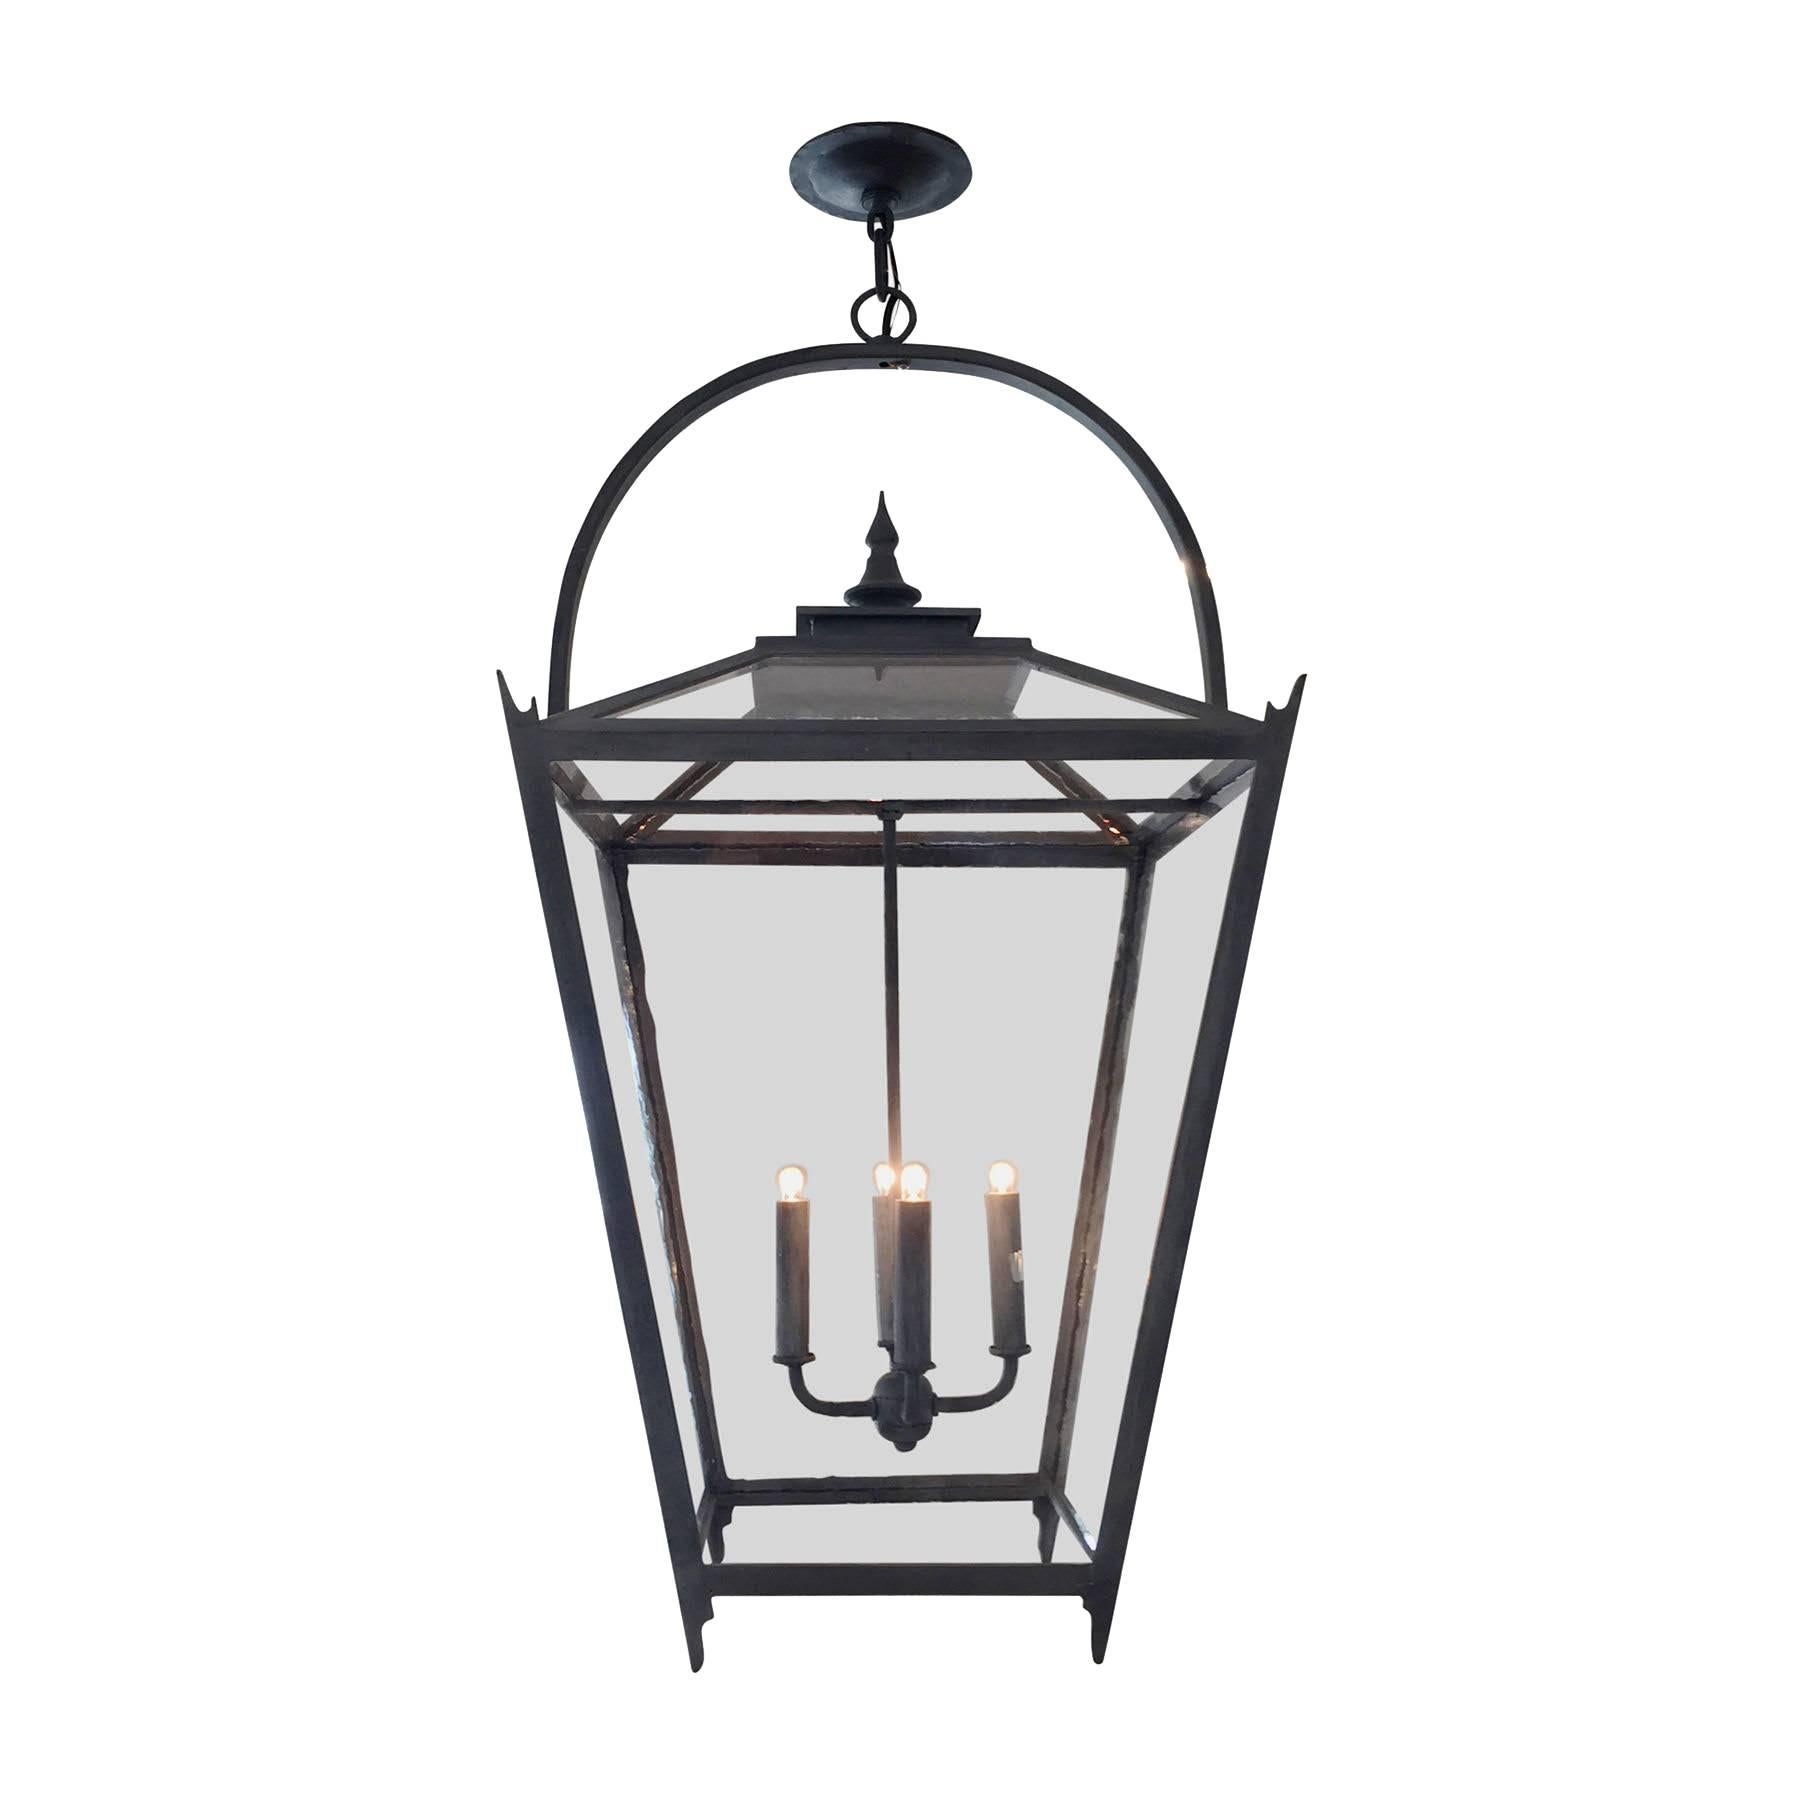 Large Wrought Iron Interior/Exterior Pendant in Zinc Finish with Antique Glass For Sale